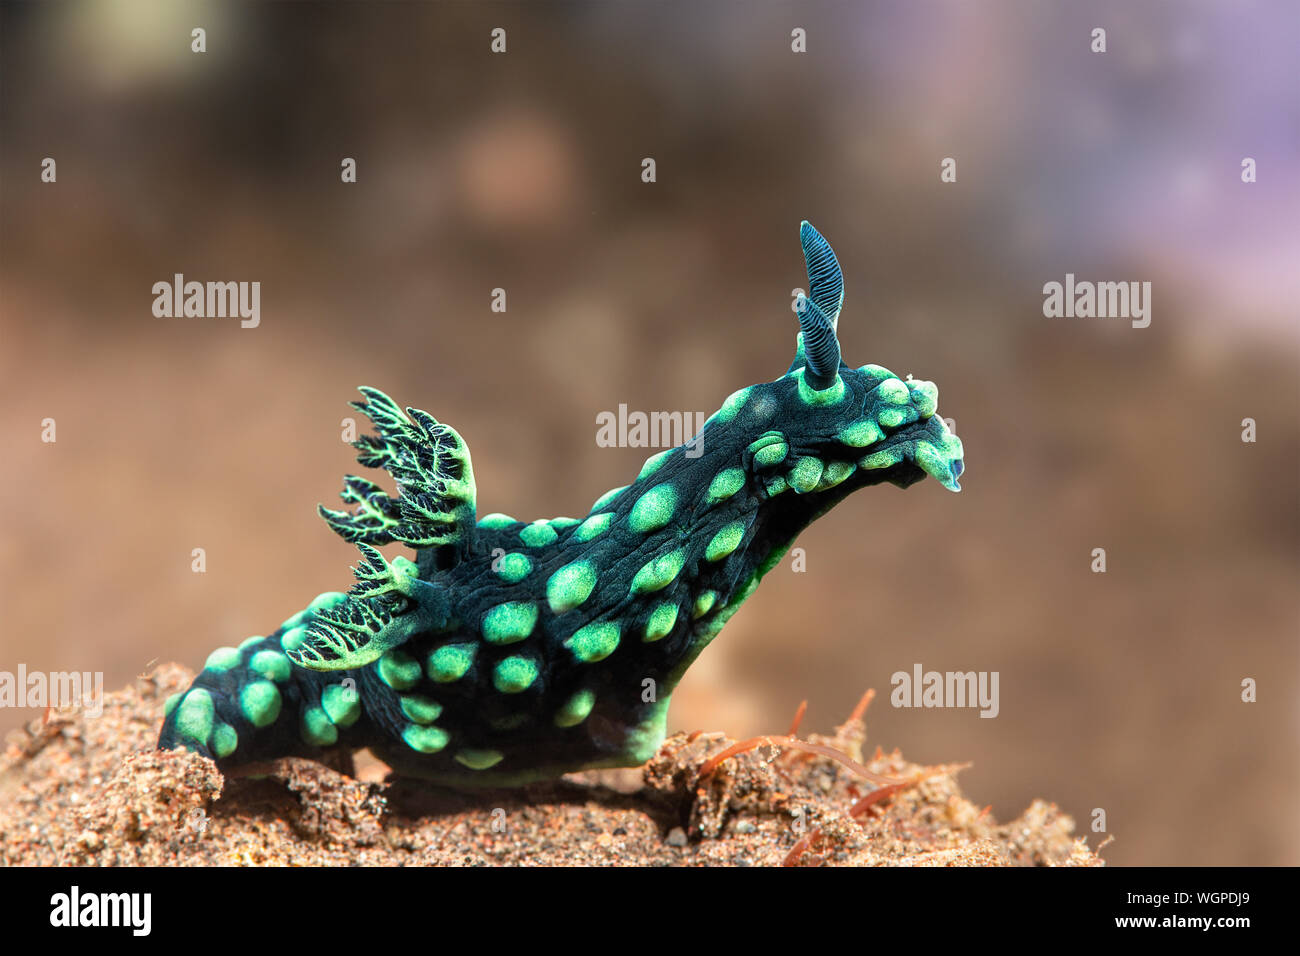 A green nembrotha nudibranch snail peers out from the tip of a reef in search of food. Stock Photo